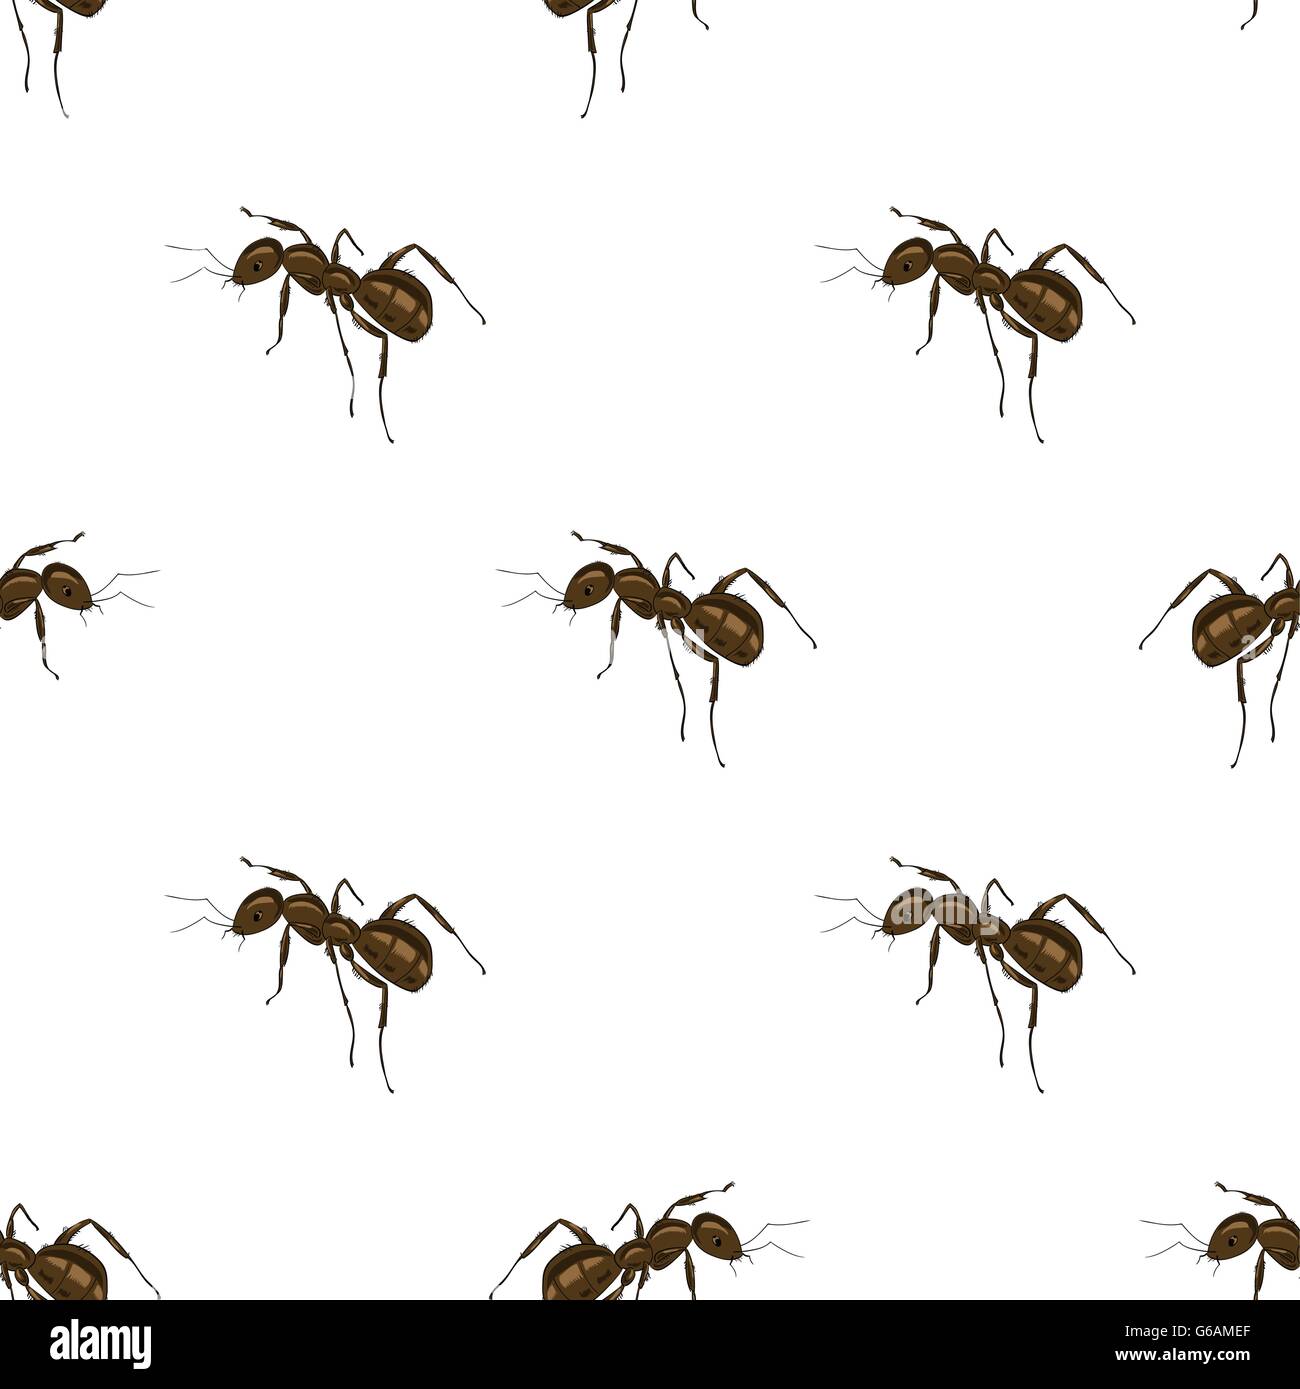 Ant Isolated on White Background. Stock Vector